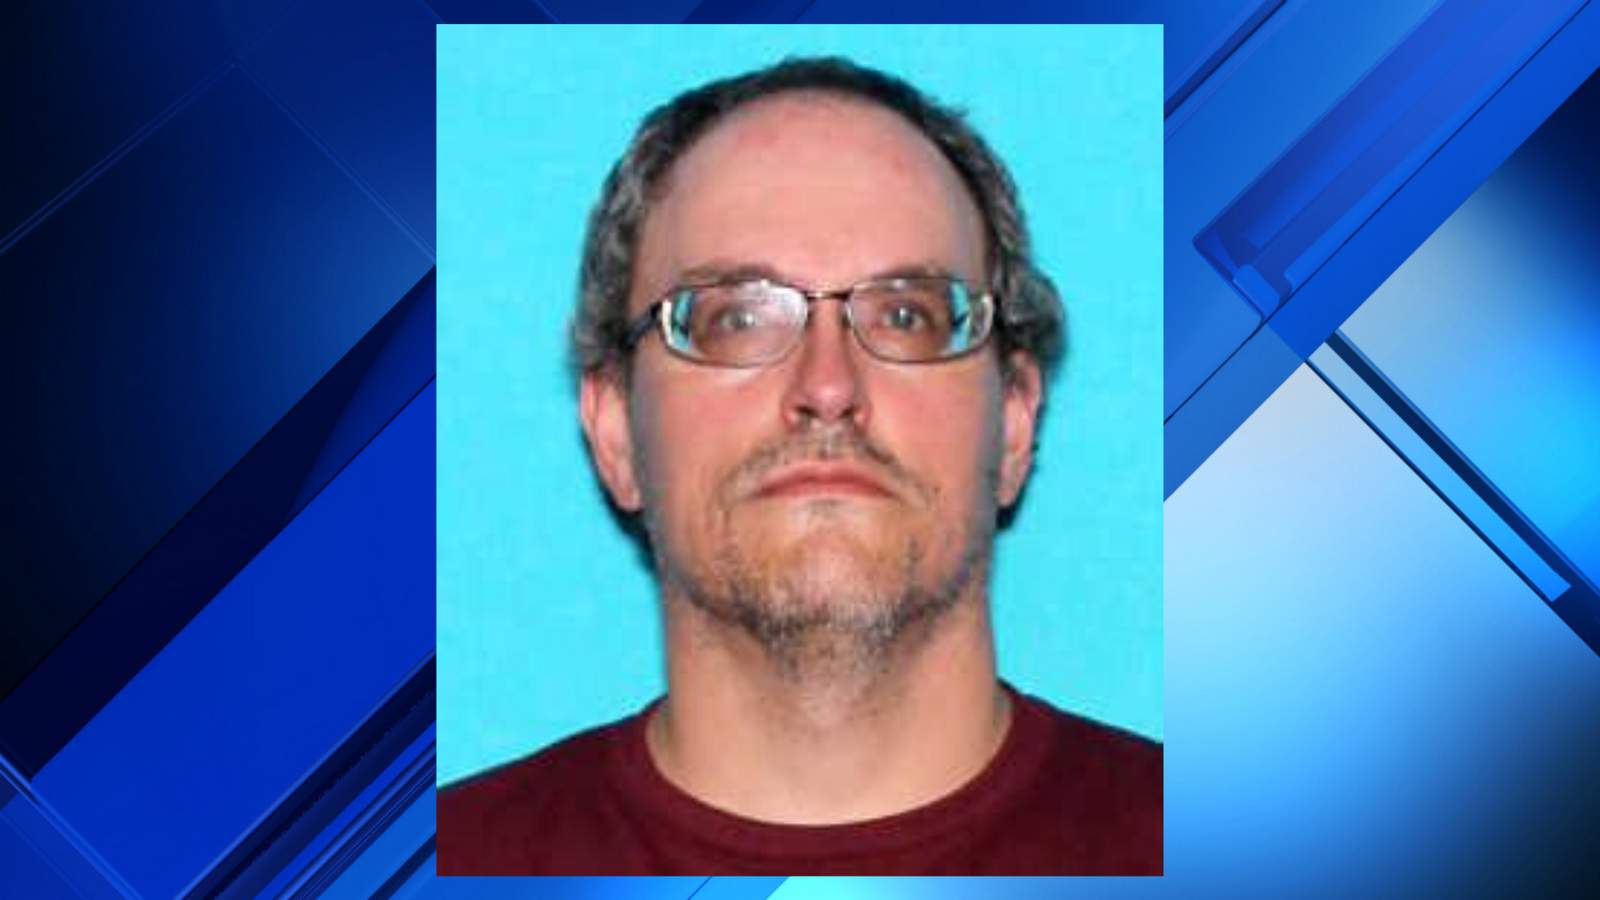 Ypsilanti man faces federal charges for child pornography years after similar conviction